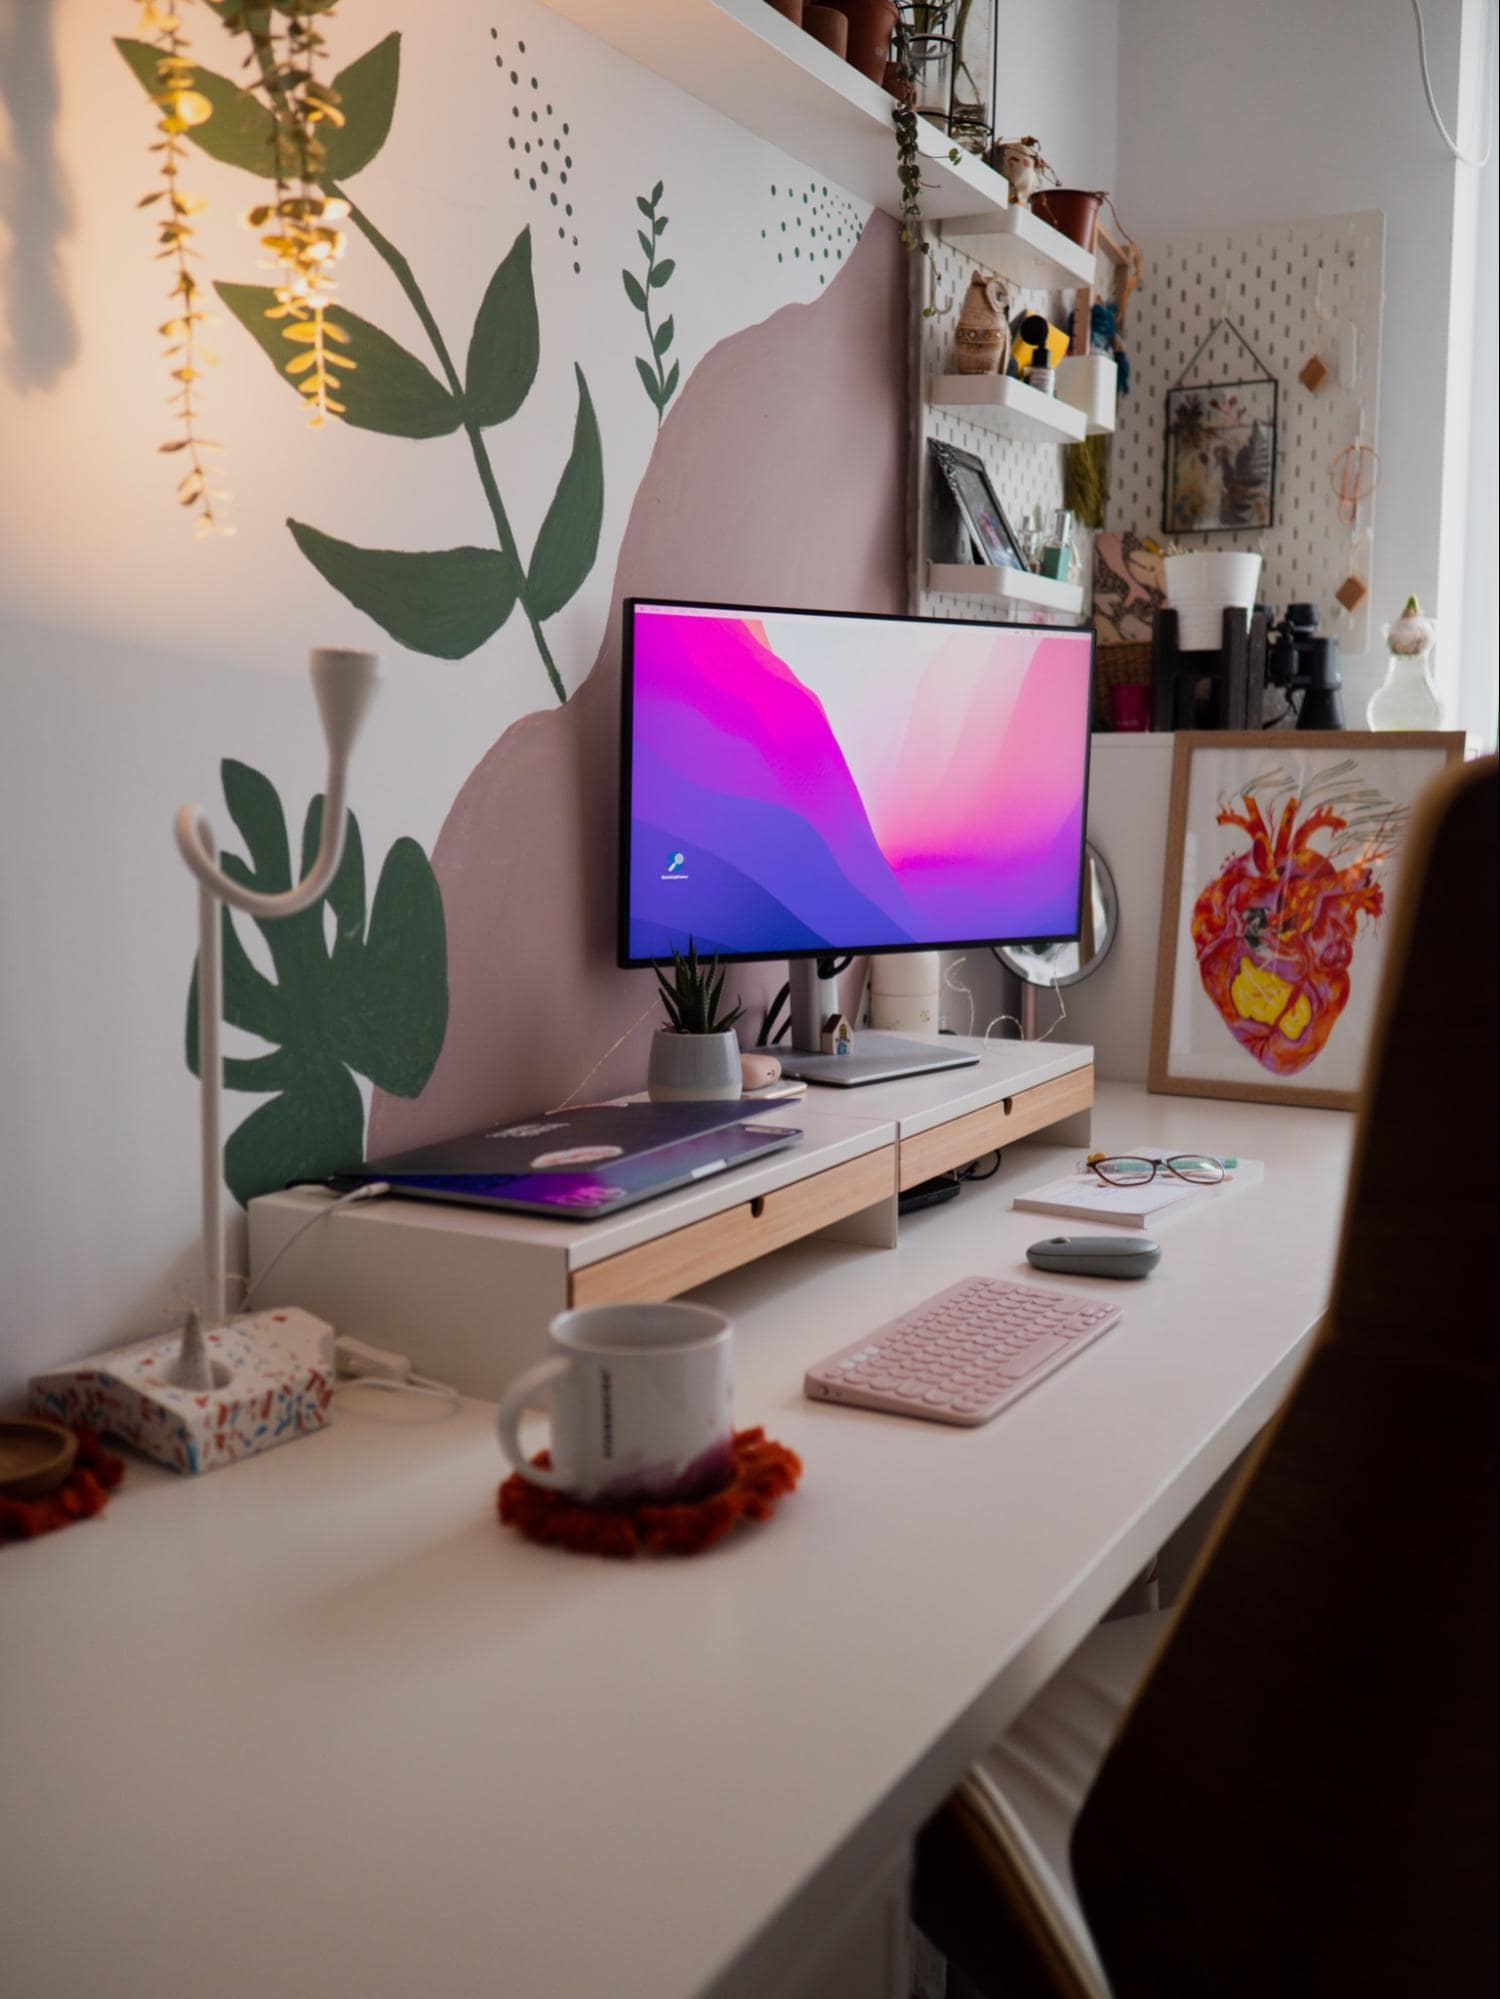 A cosy desk setup with a hand-painted wall and some artwork